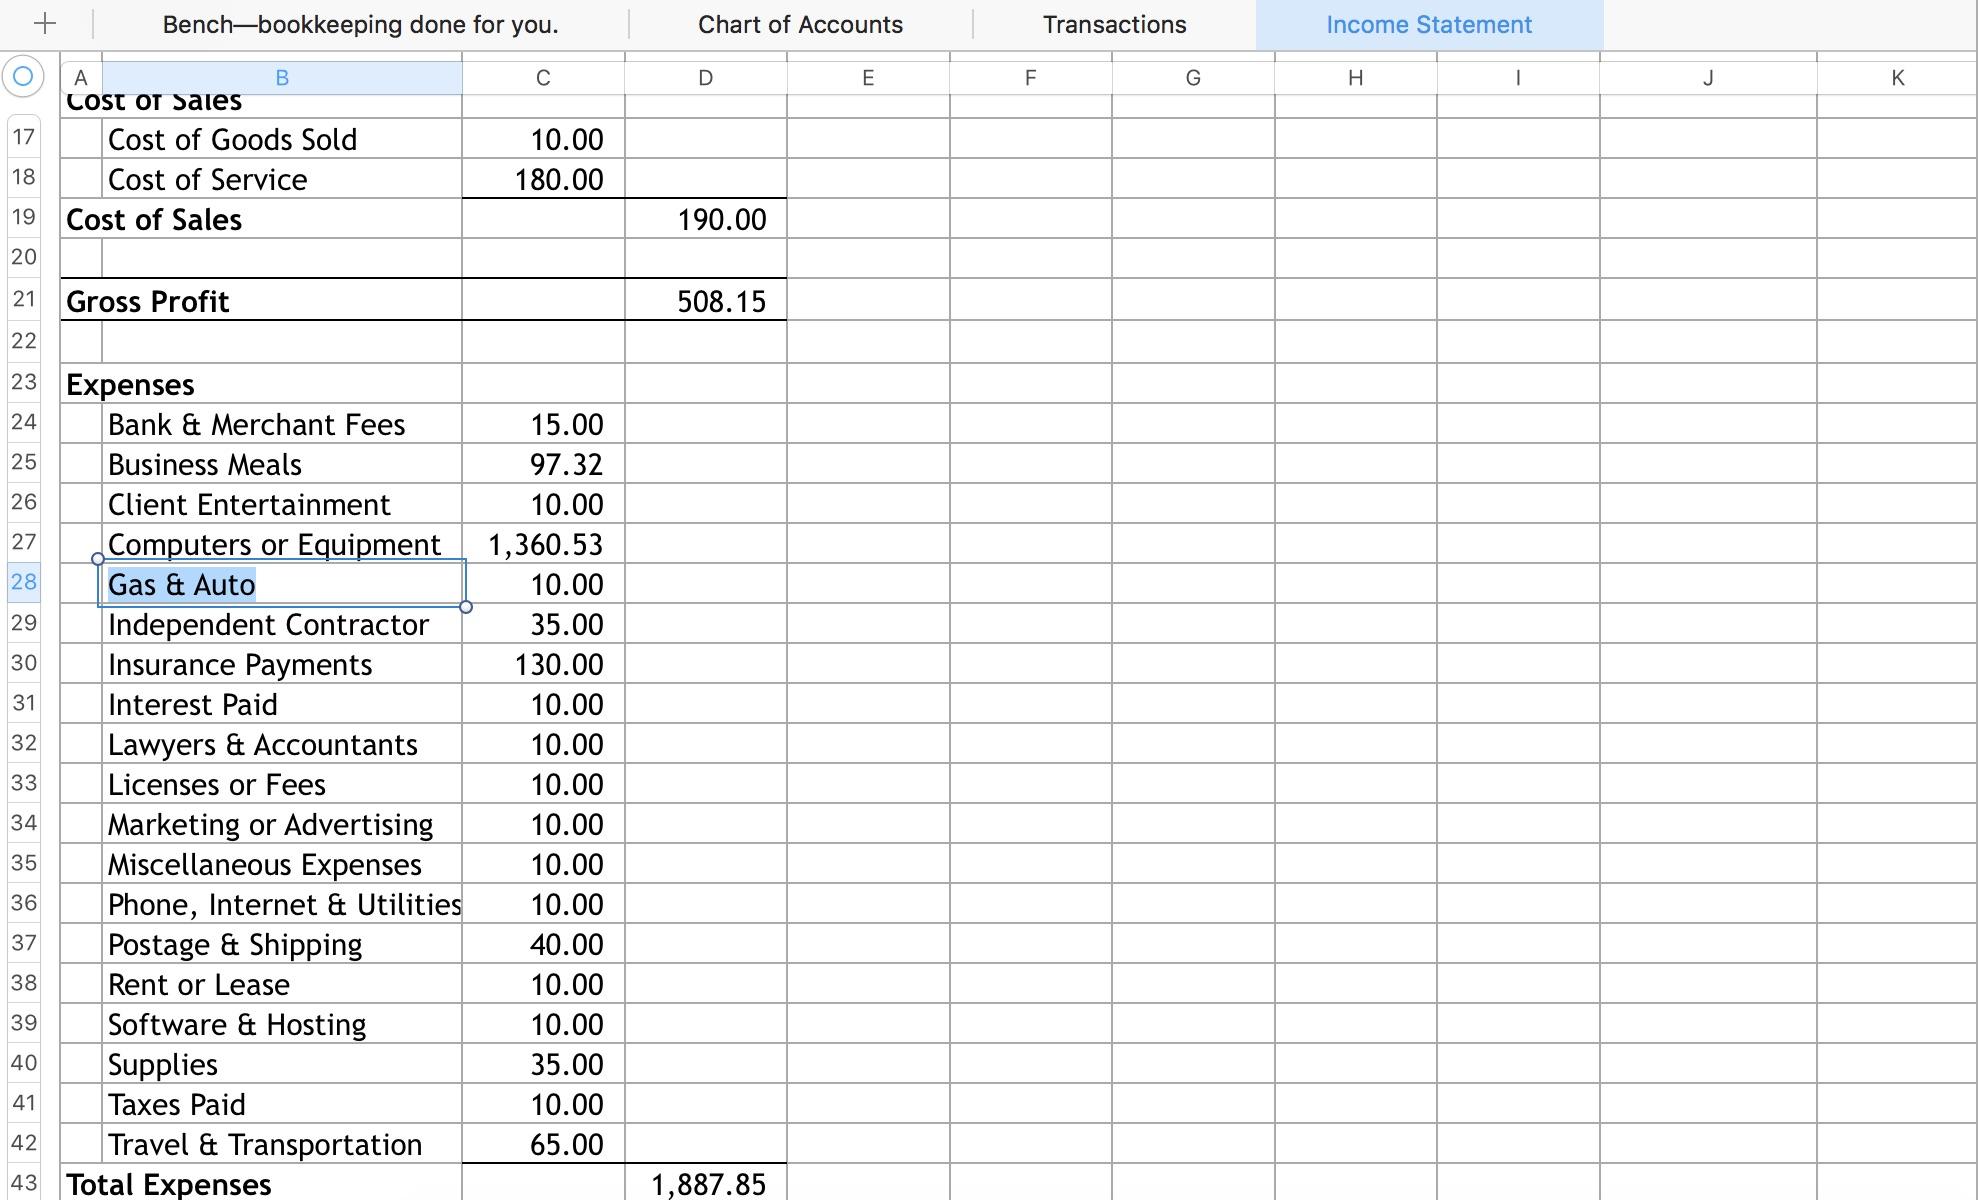 Excel Accounting and Bookkeeping (Template Included)  Bench Regarding Business Accounts Excel Template